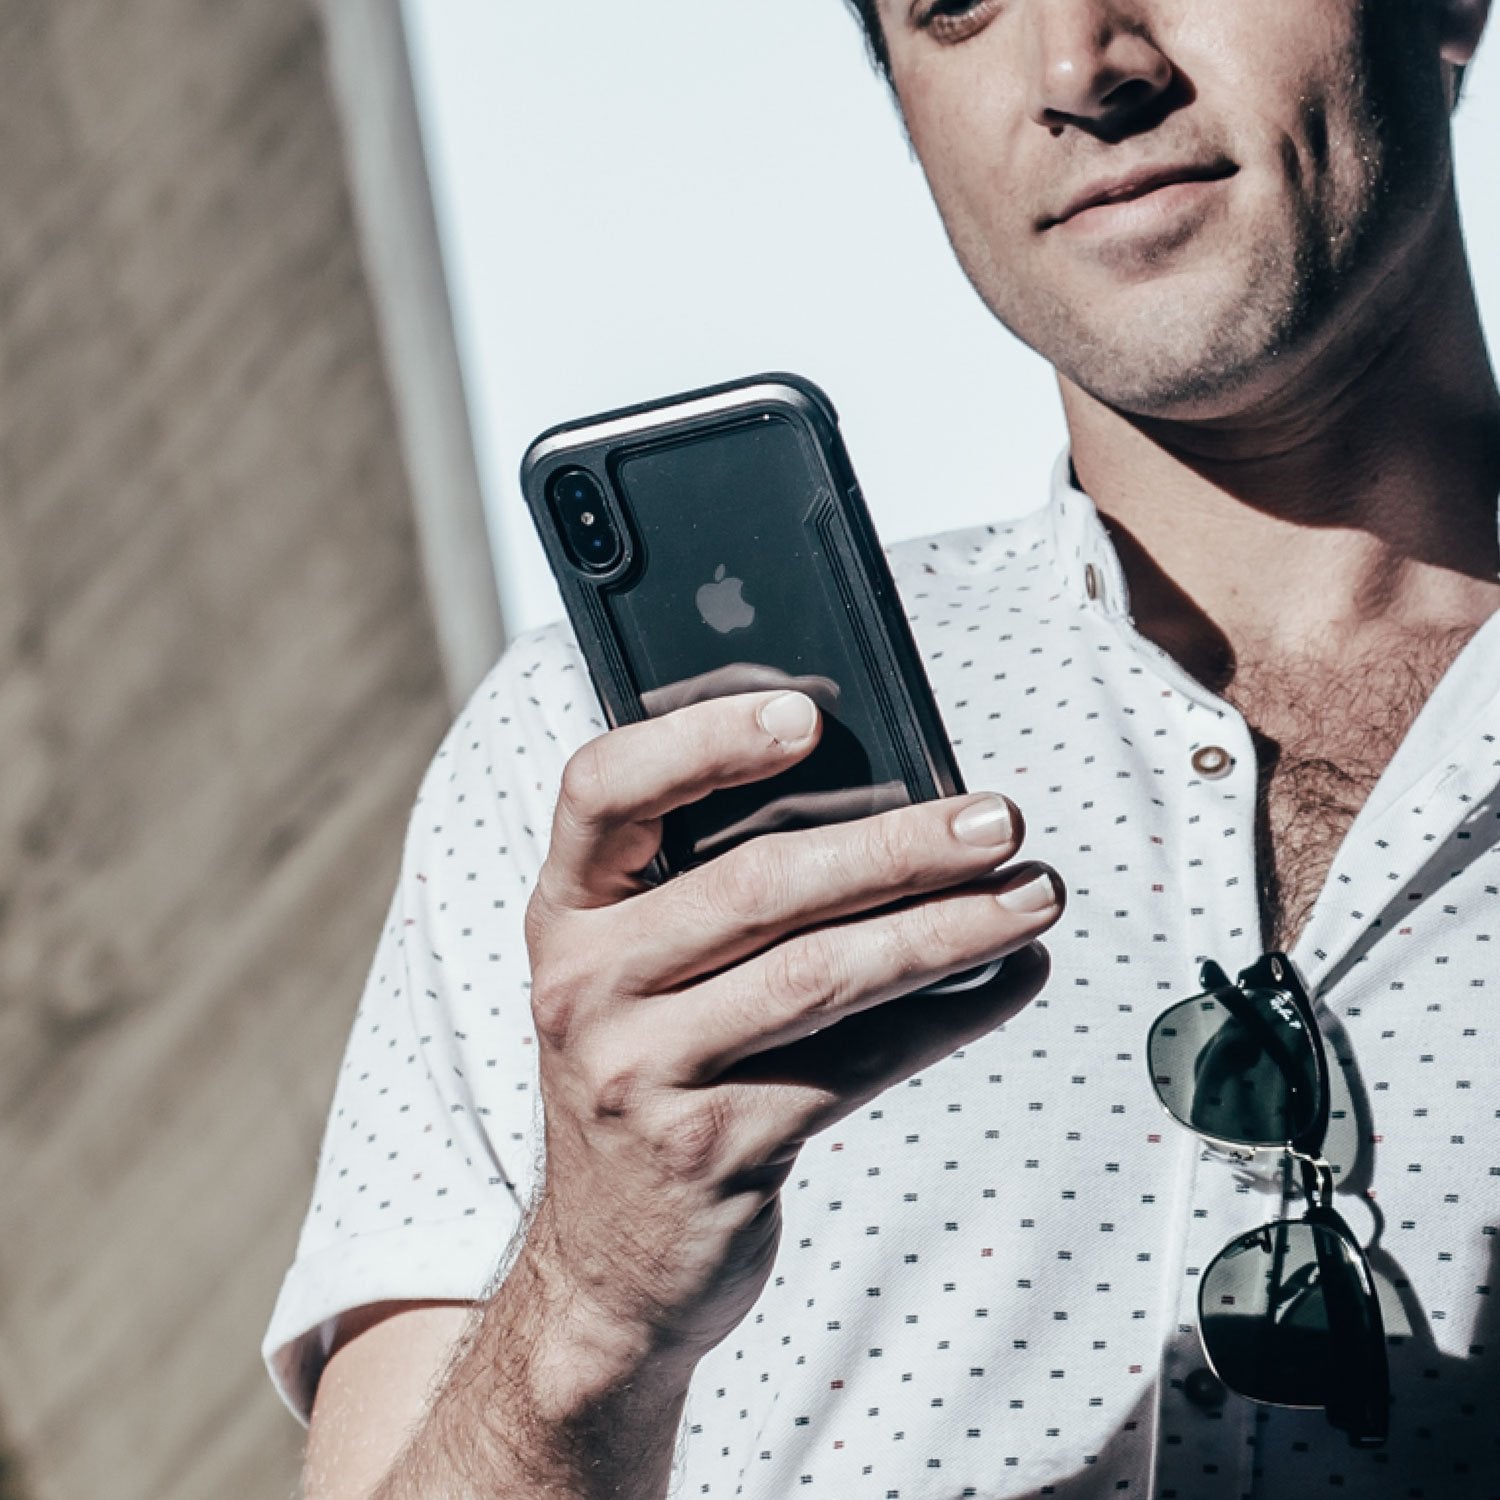 A man holding an iPhone X/XS while looking at it, protected by the Raptic SHIELD case.